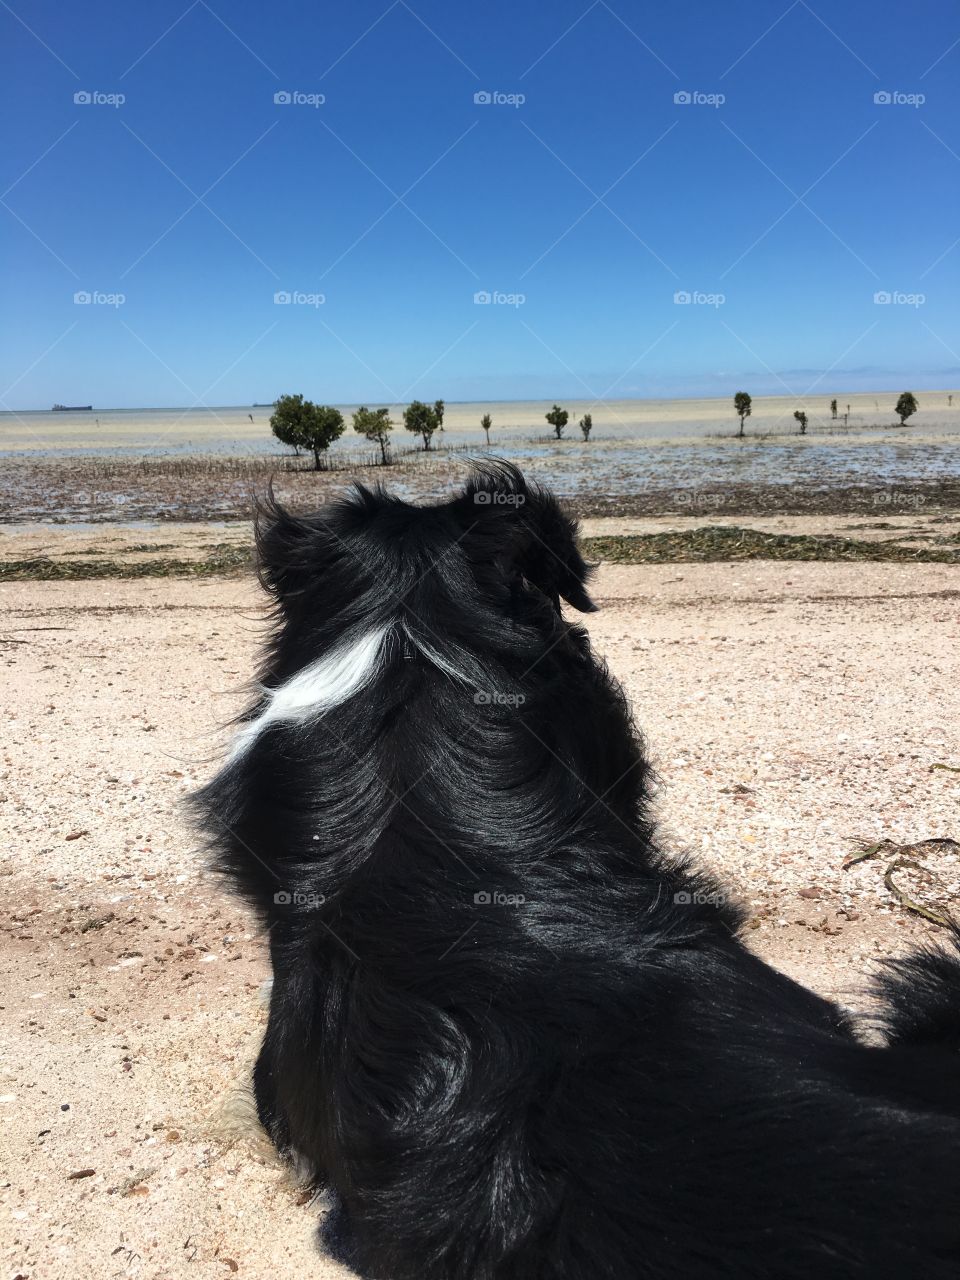 Back view, border collie sheepdog sitting on beach looking out toward ocean